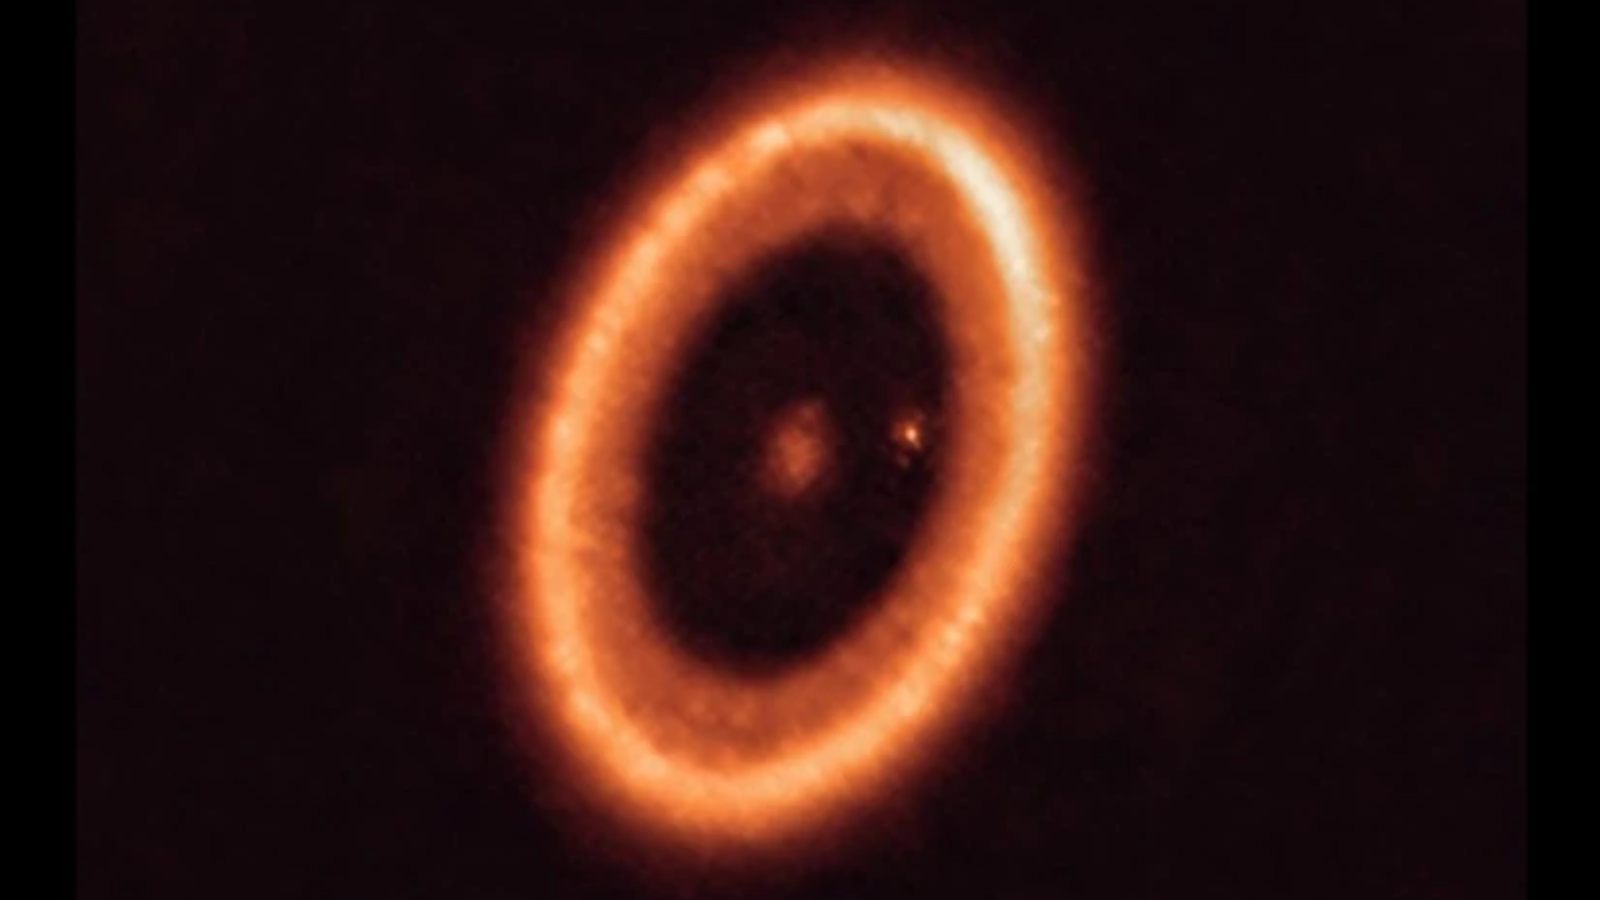 'Eye of Sauron' image reveals disc forming around alien planet ...